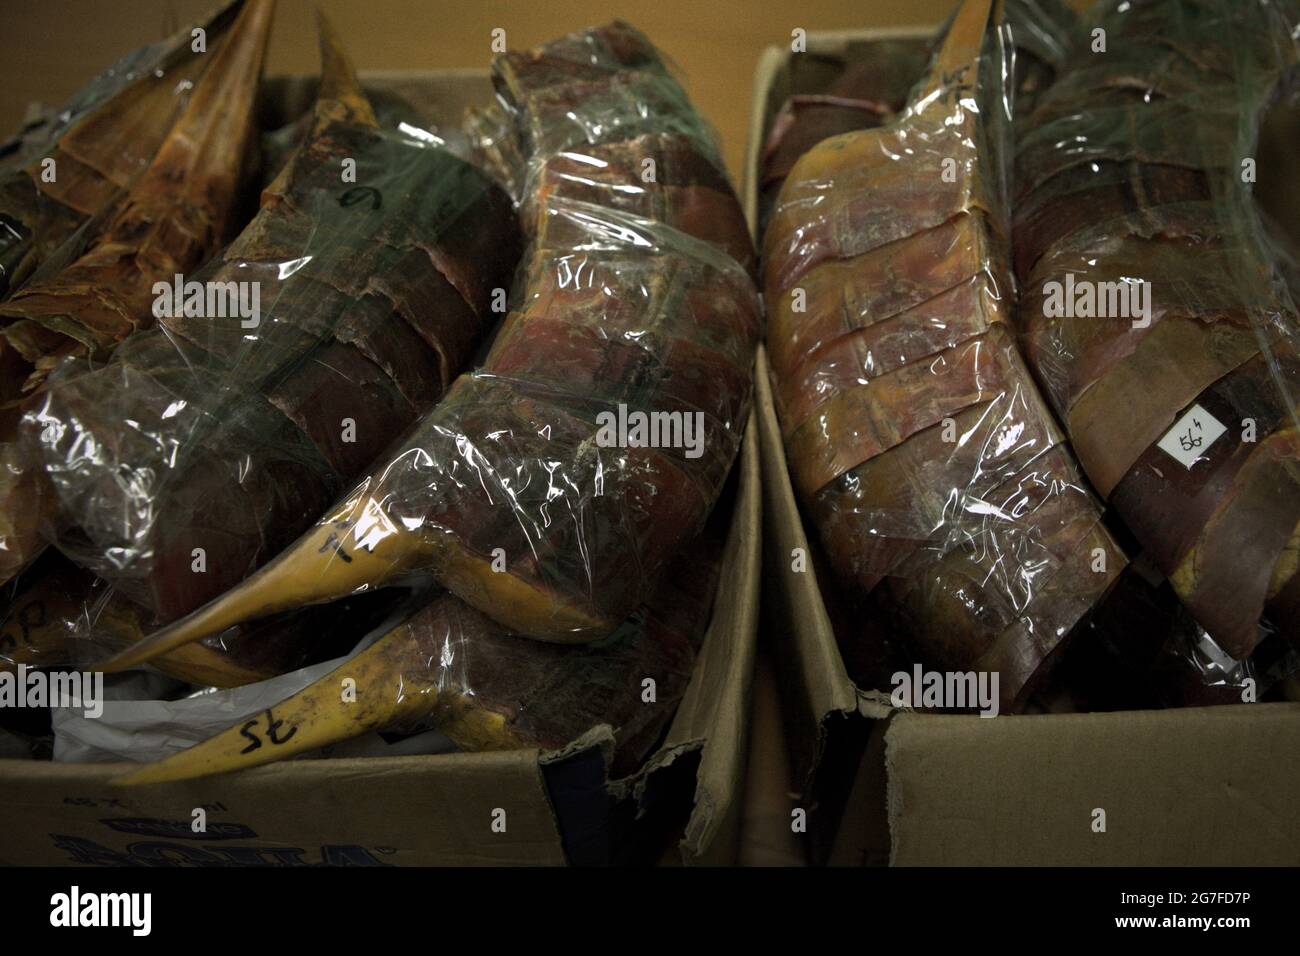 Jakarta, Indonesia. 1st July 2013. Beaks of hornbills that were seized from being smuggled to China from Jakarta's Soekarno-Hatta International Airport. Photographed at the office of Indonesia's Nature Conservation Agency (BKSDA) in Jakarta. Stock Photo